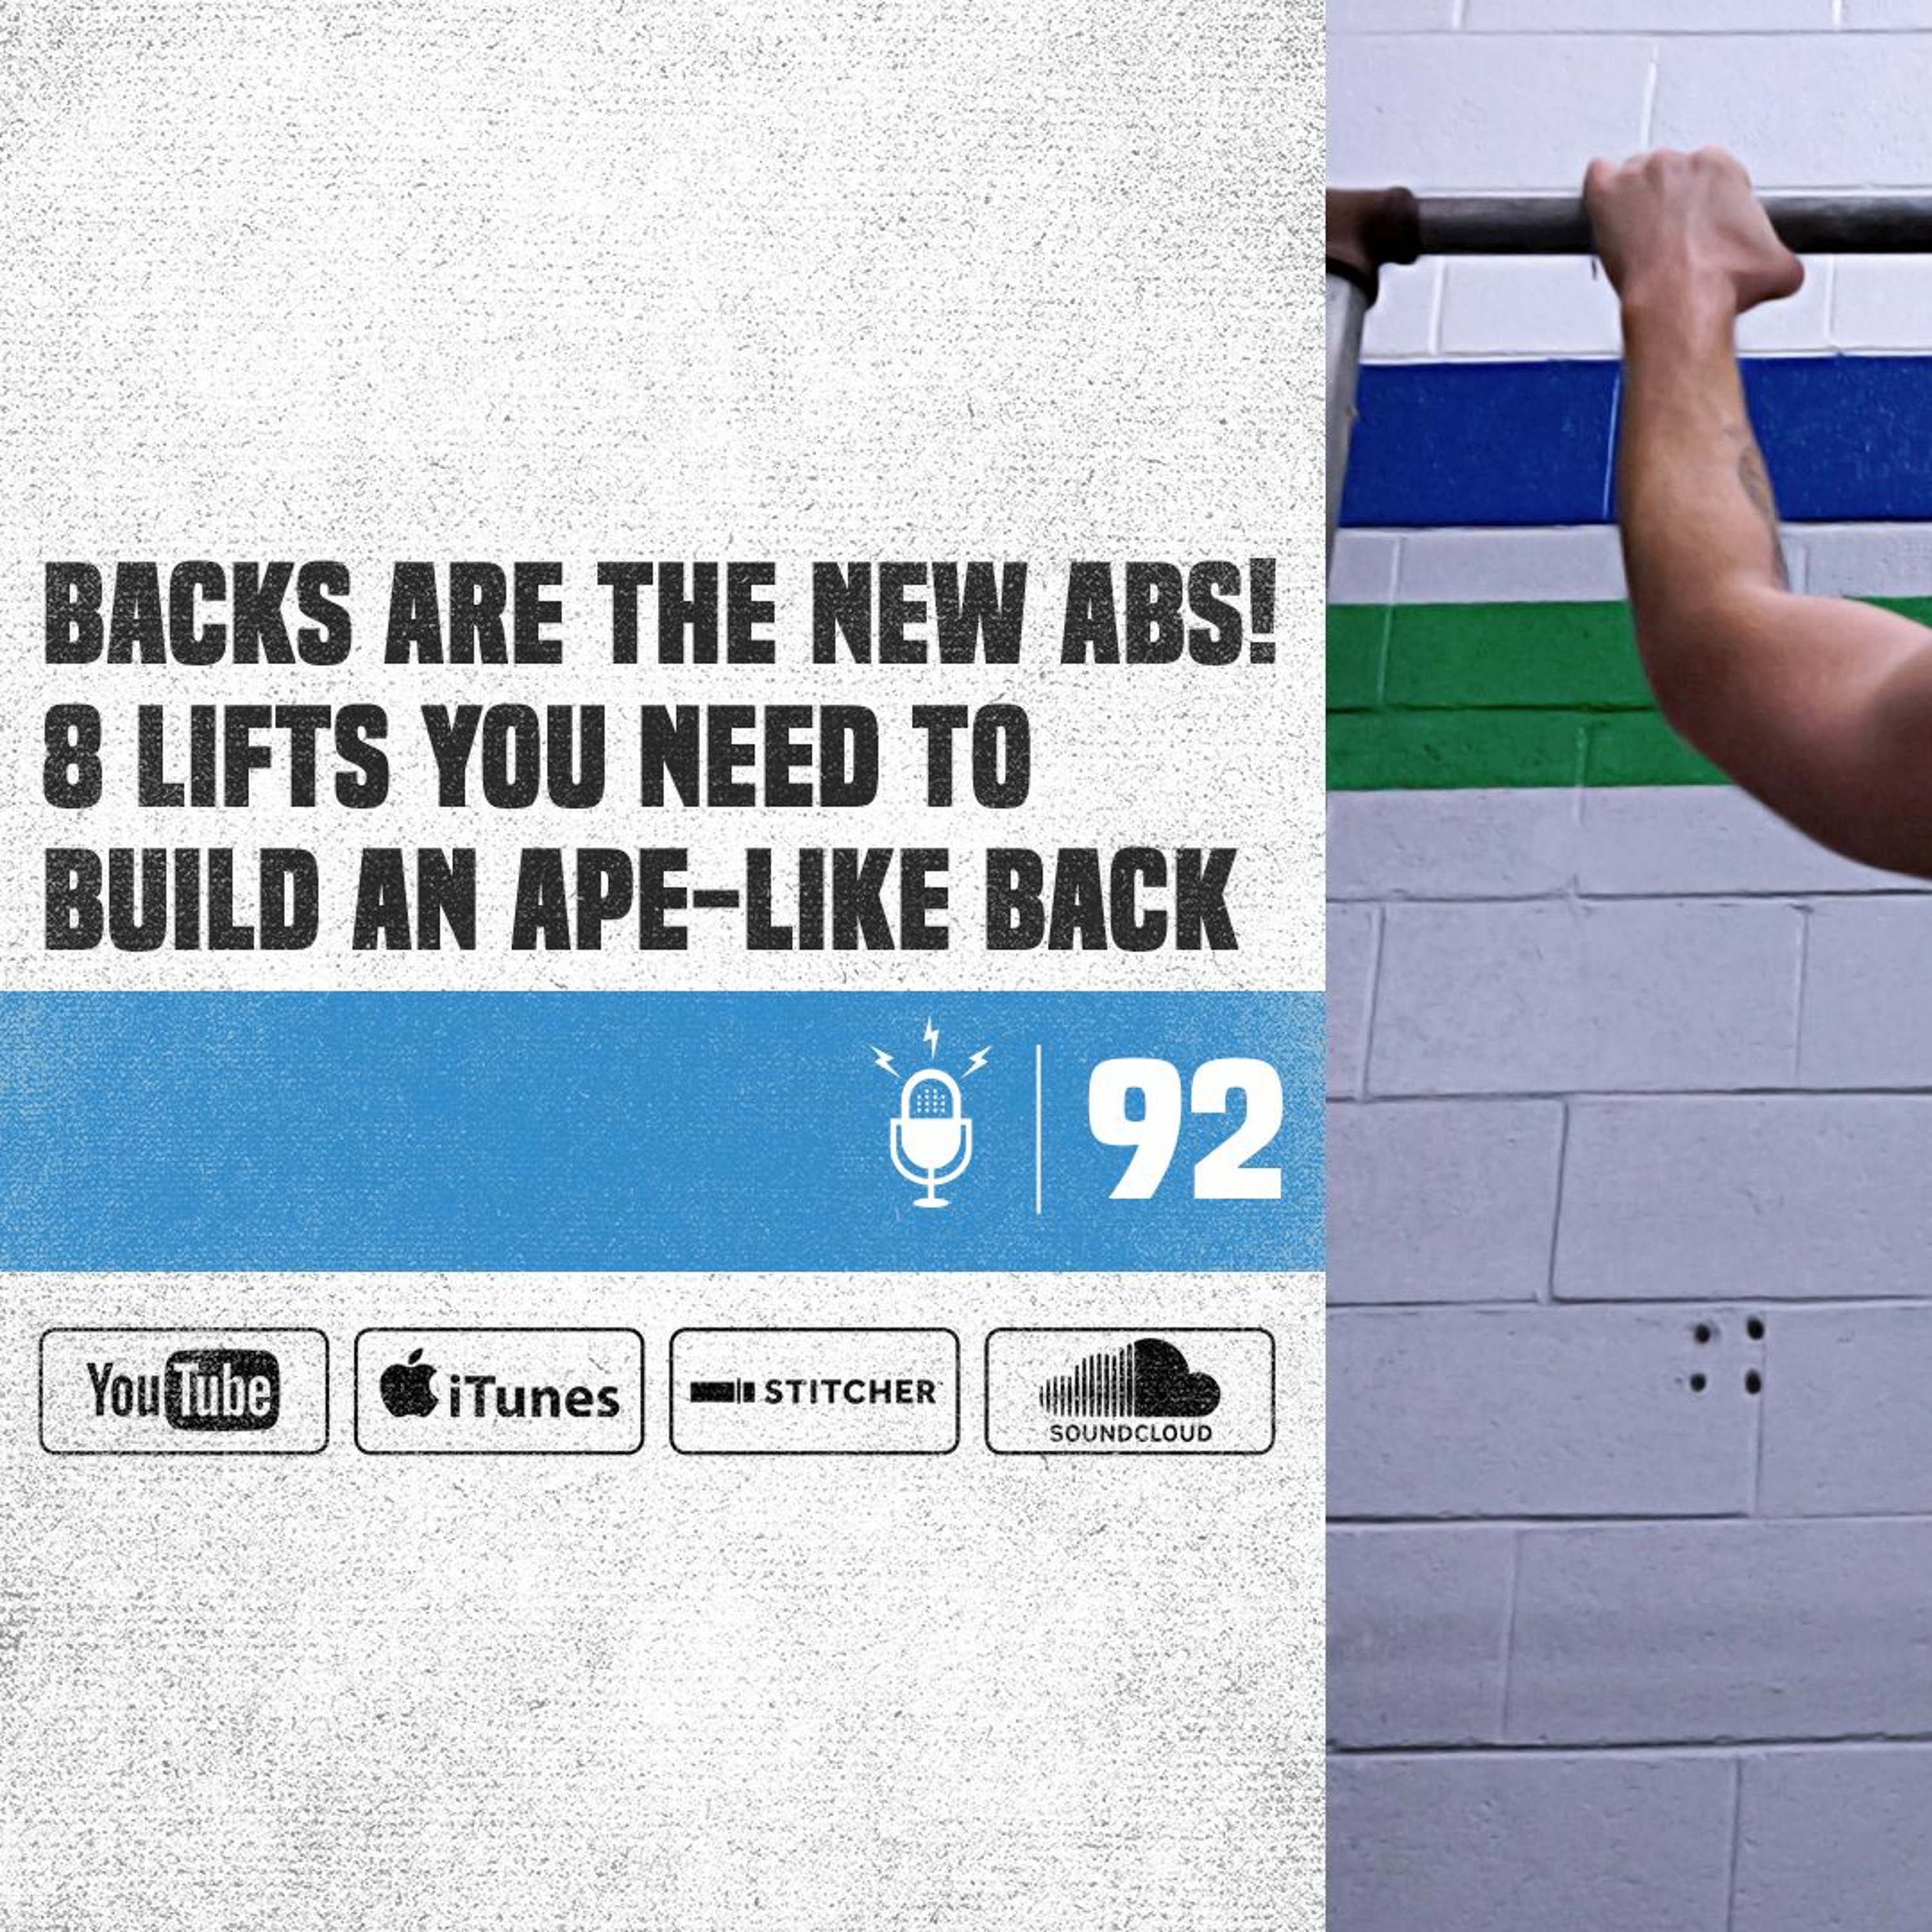 #92 Backs Are the New Abs! 8 Lifts You Need To Build An Ape-Like Back